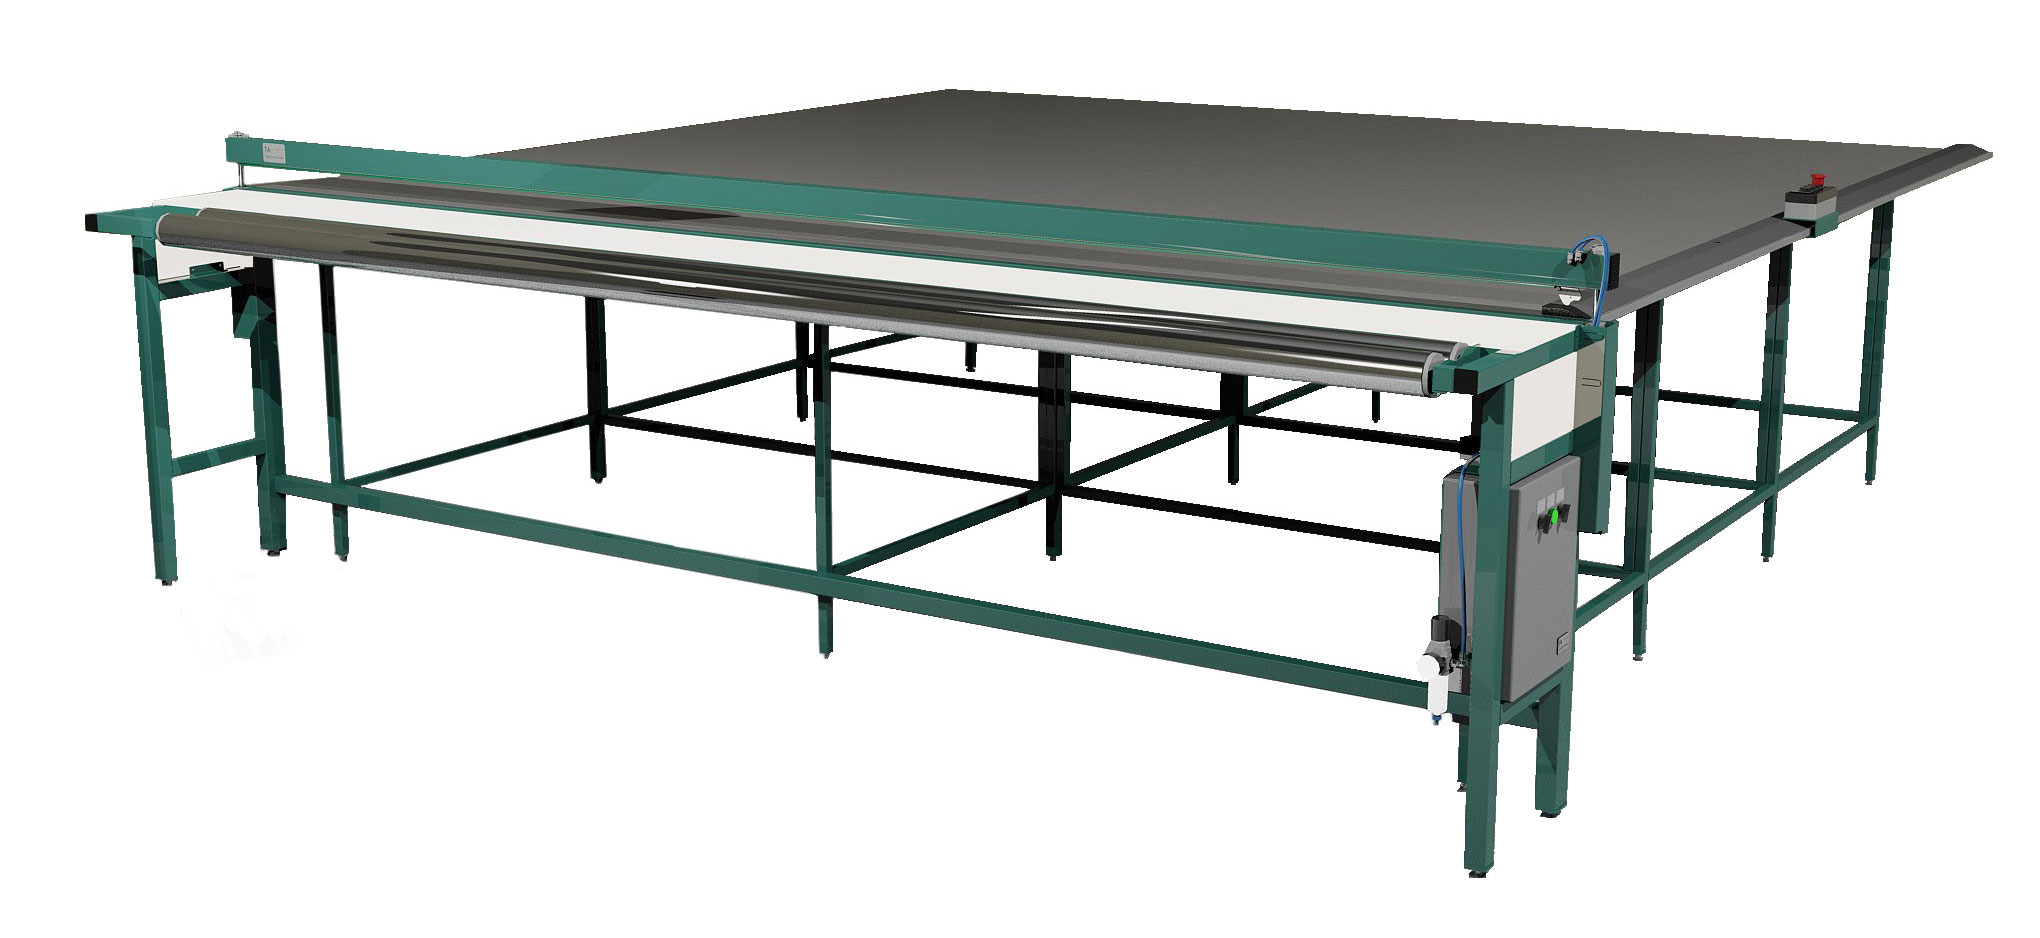 Industrial fabric cutting table from TA | basic version